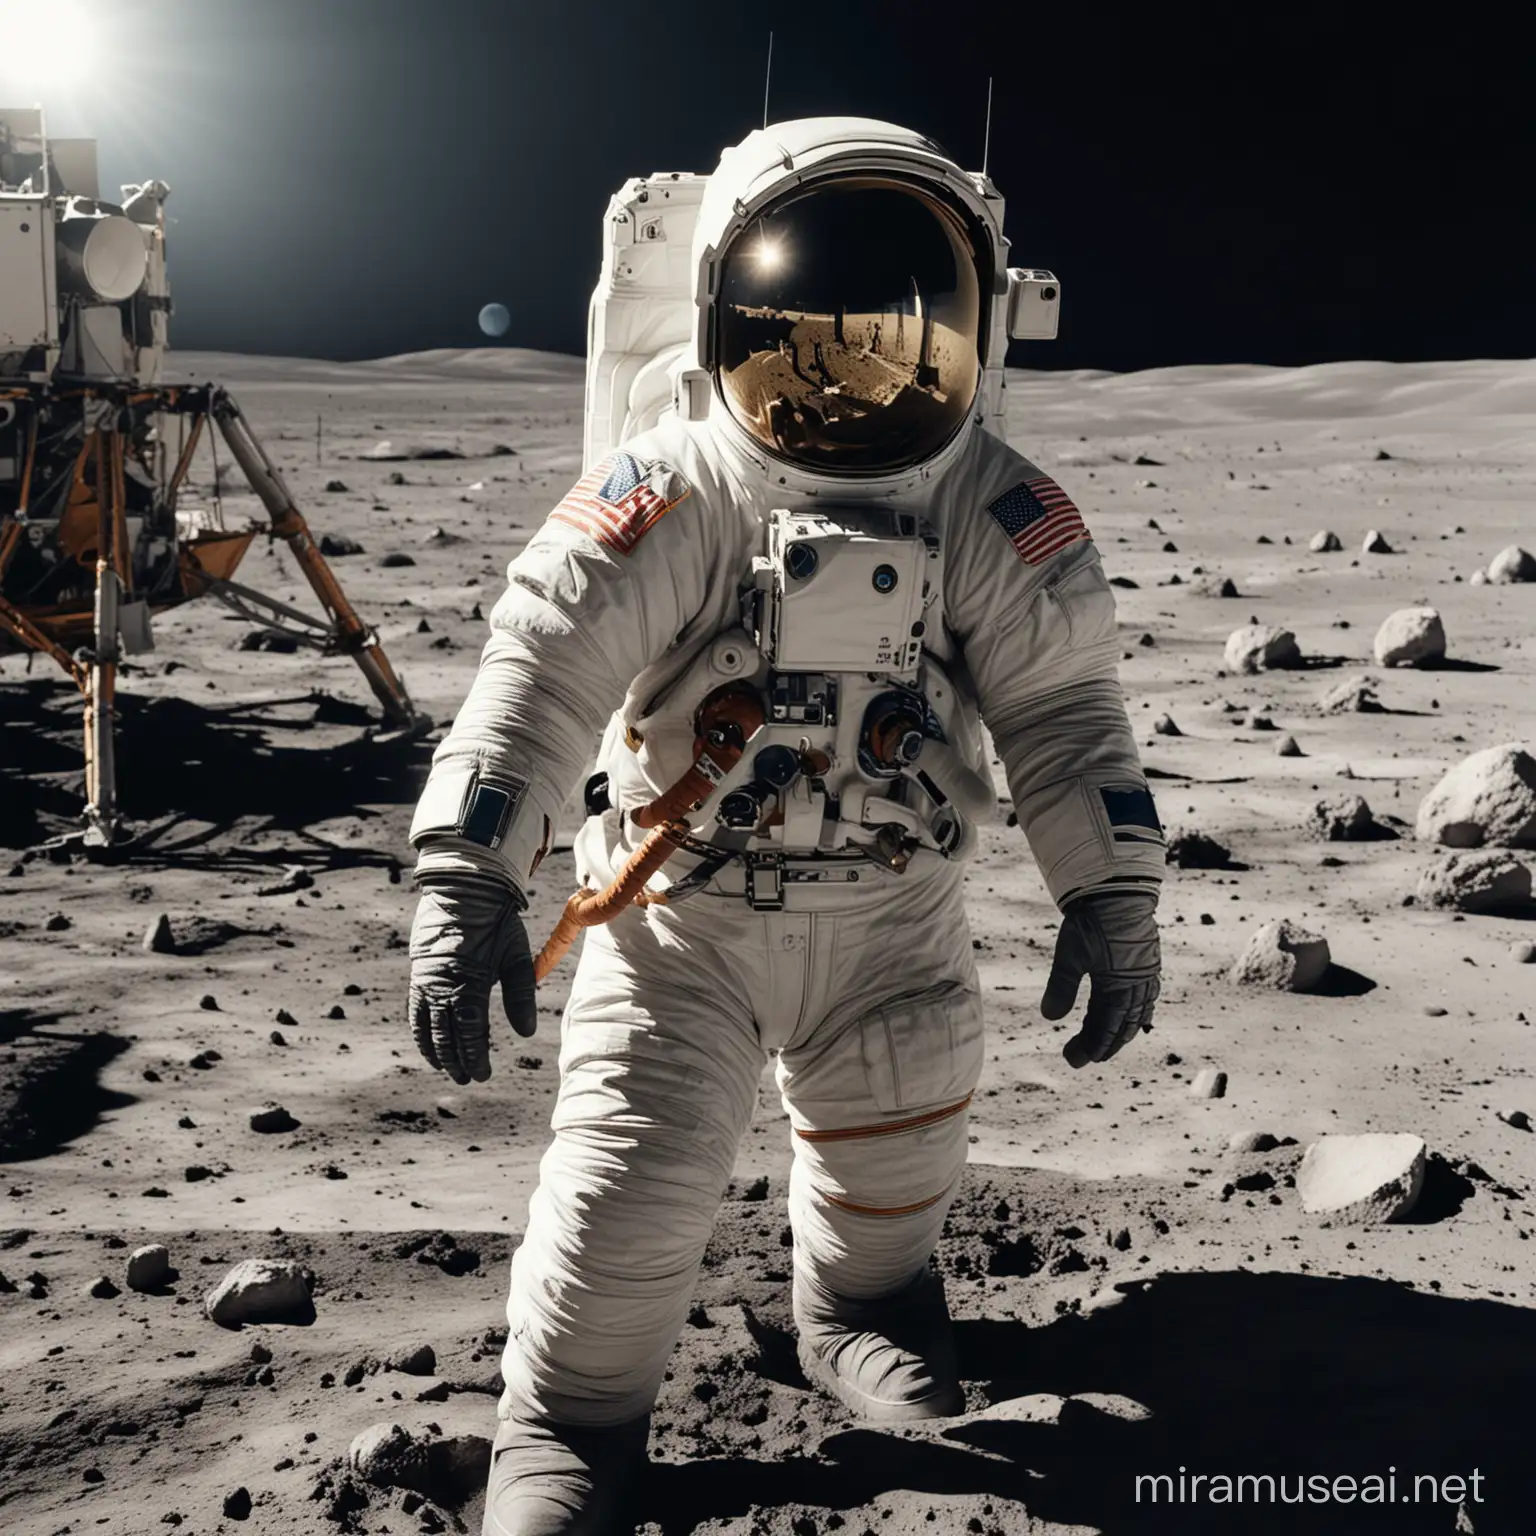 an astronaut in a spacesuit on the moon prepares for flight
